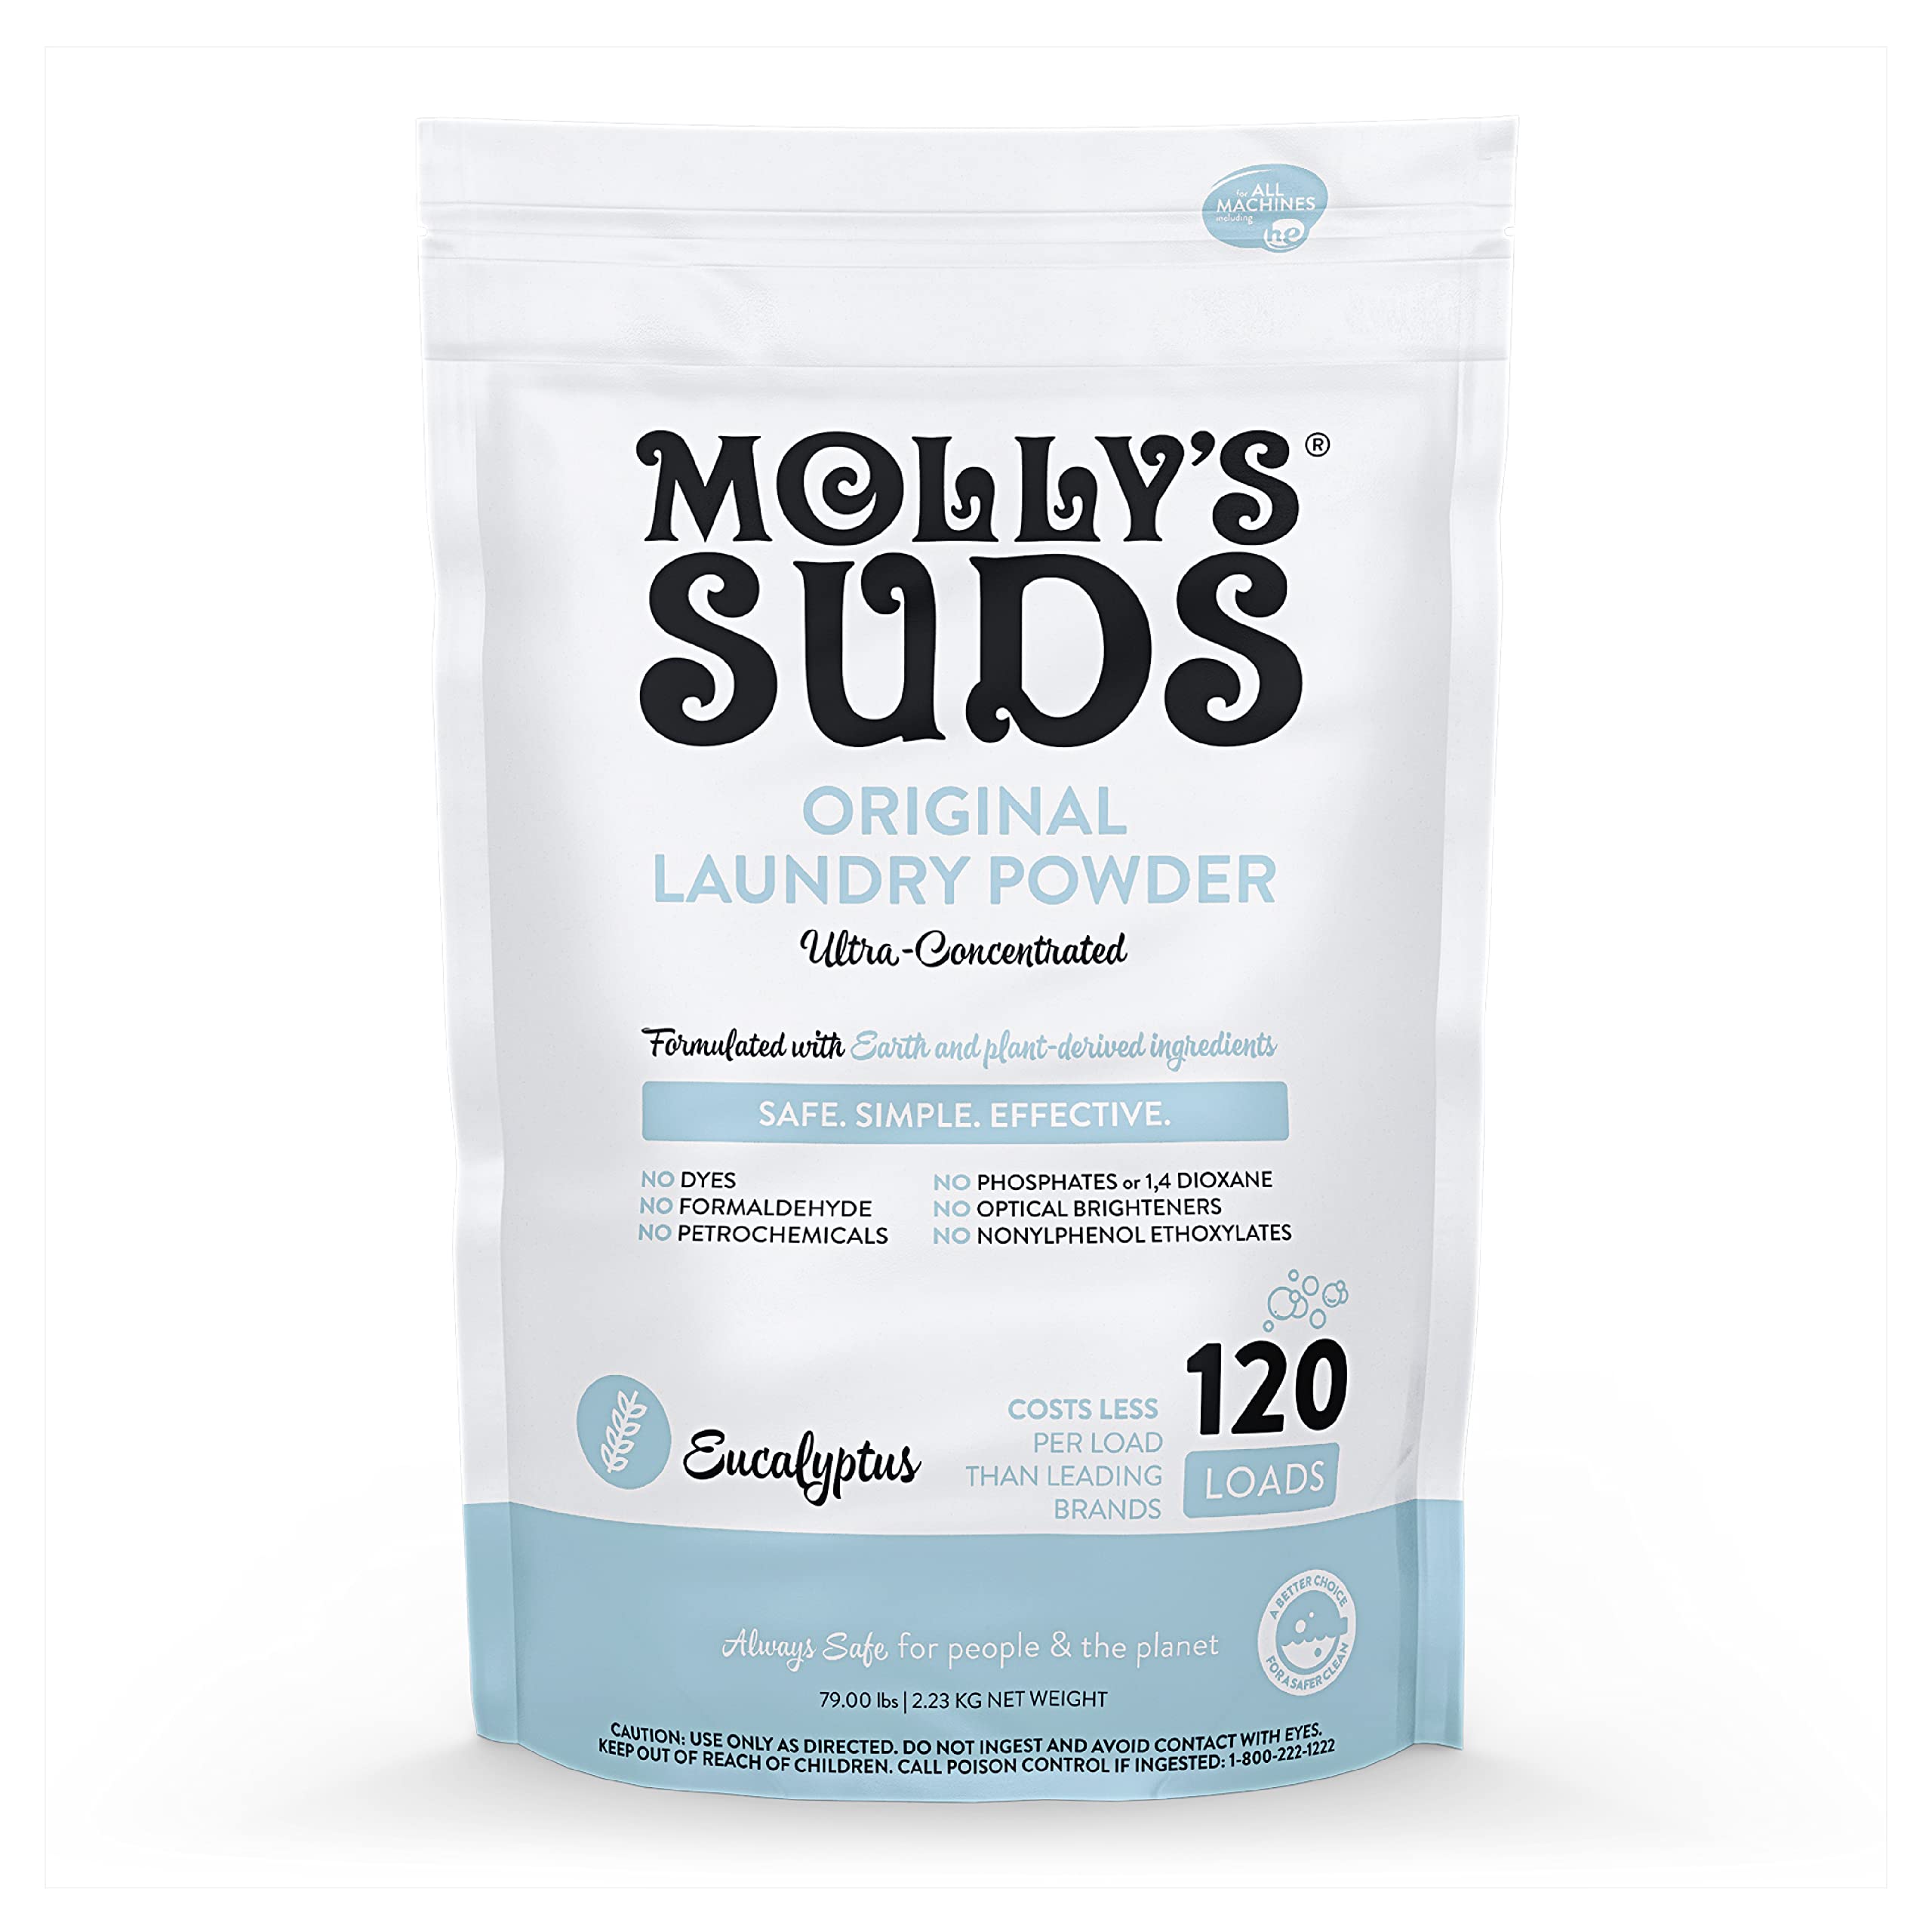 Molly's Suds Super Powder Detergent, Natural Extra Strength Laundry Soap,  Stain Fighting & Safe for Sensitive Skin, Earth Derived Ingredients